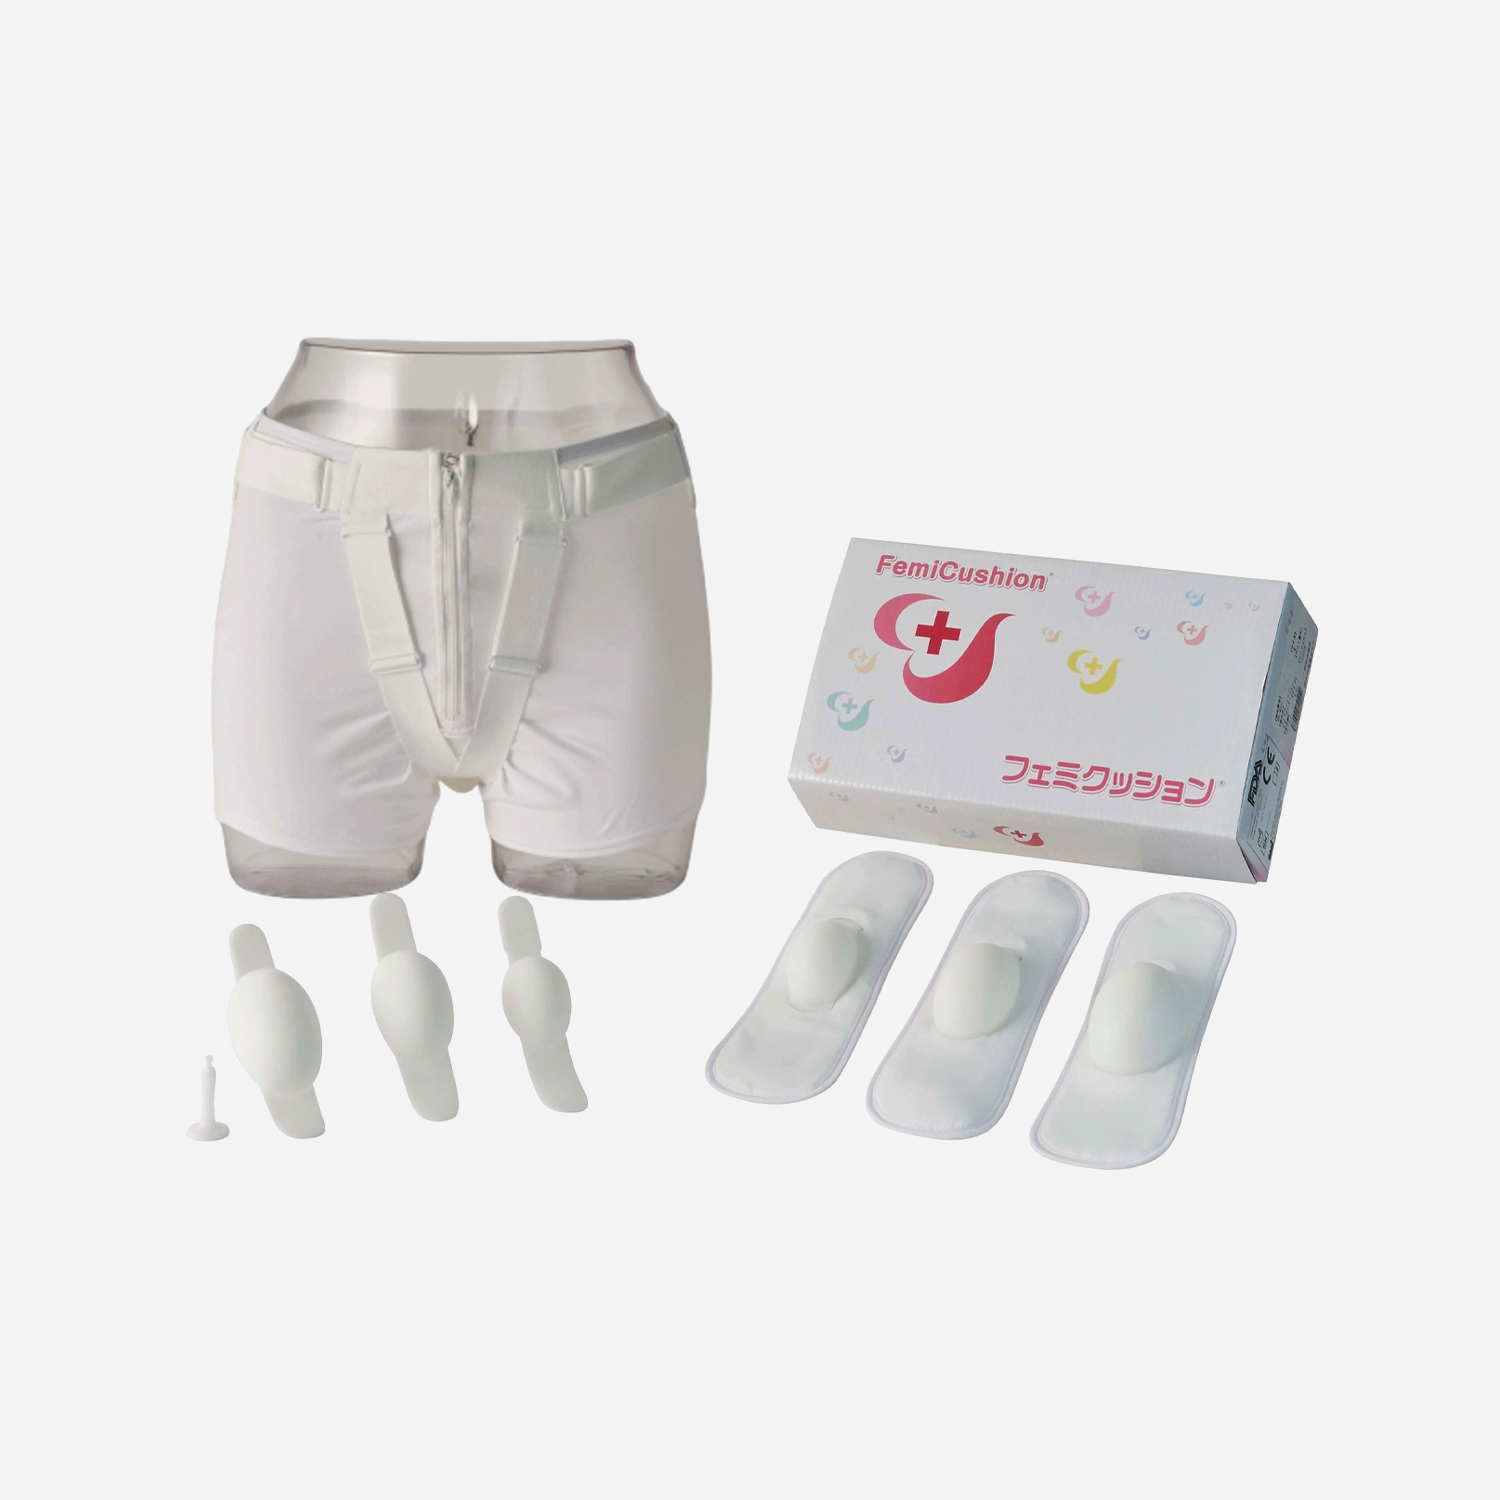 FemiCushion Standard Deluxe Kit - Prolapse Relief Without A